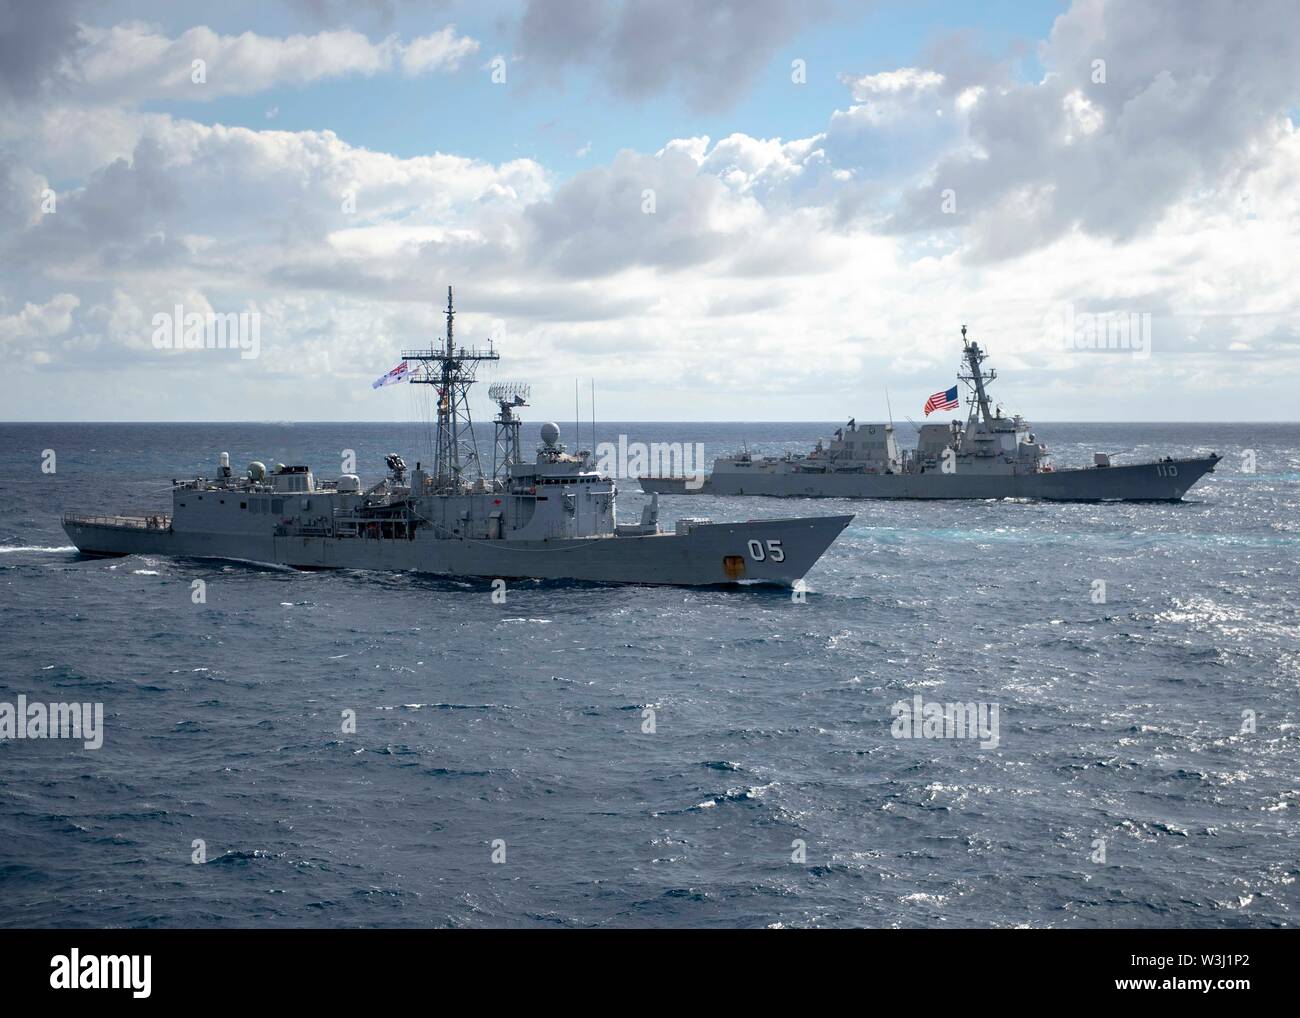 190711-N-WK982-3065 CORAL SEA (July 11, 2019) The Royal Australian Navy Adelaide-class guided-missile frigate HMAS Melbourne (FFG 05), left, and the Arleigh Burke-class guided-missile destroyer USS William P. Lawrence (DDG 110) maneuver into formation during Talisman Sabre 2019. Talisman Sabre 2019 illustrates the closeness of the Australian and U.S. alliance and the strength of the military-to-military relationship. This is the eighth iteration of this exercise. (U.S. Navy photo by Mass Communication Specialist 2nd Class John Harris/Released) Stock Photo